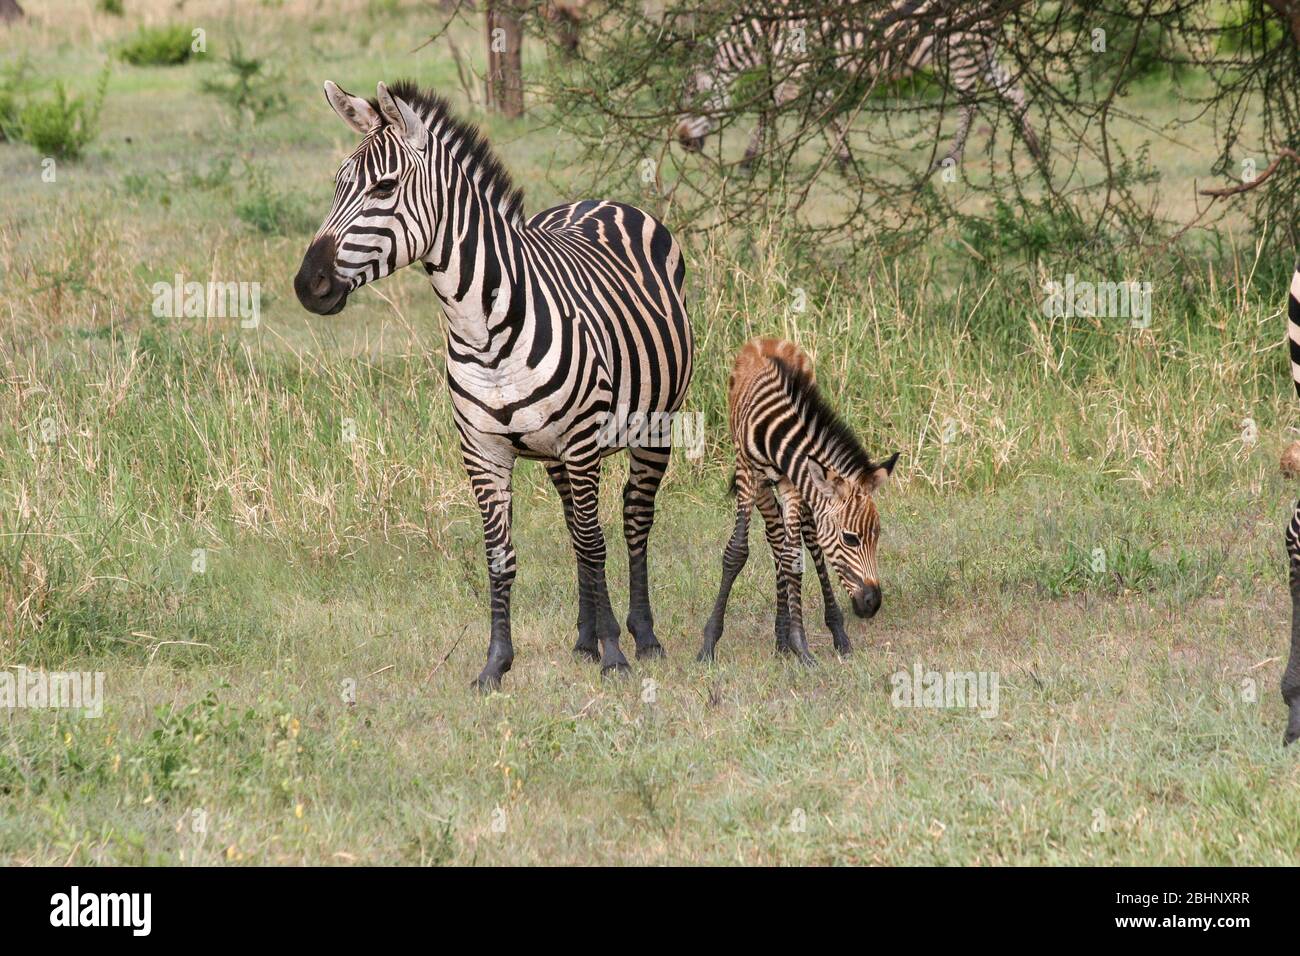 Juvenile Zebra foal with its mother Photographed in Tanzania Stock Photo